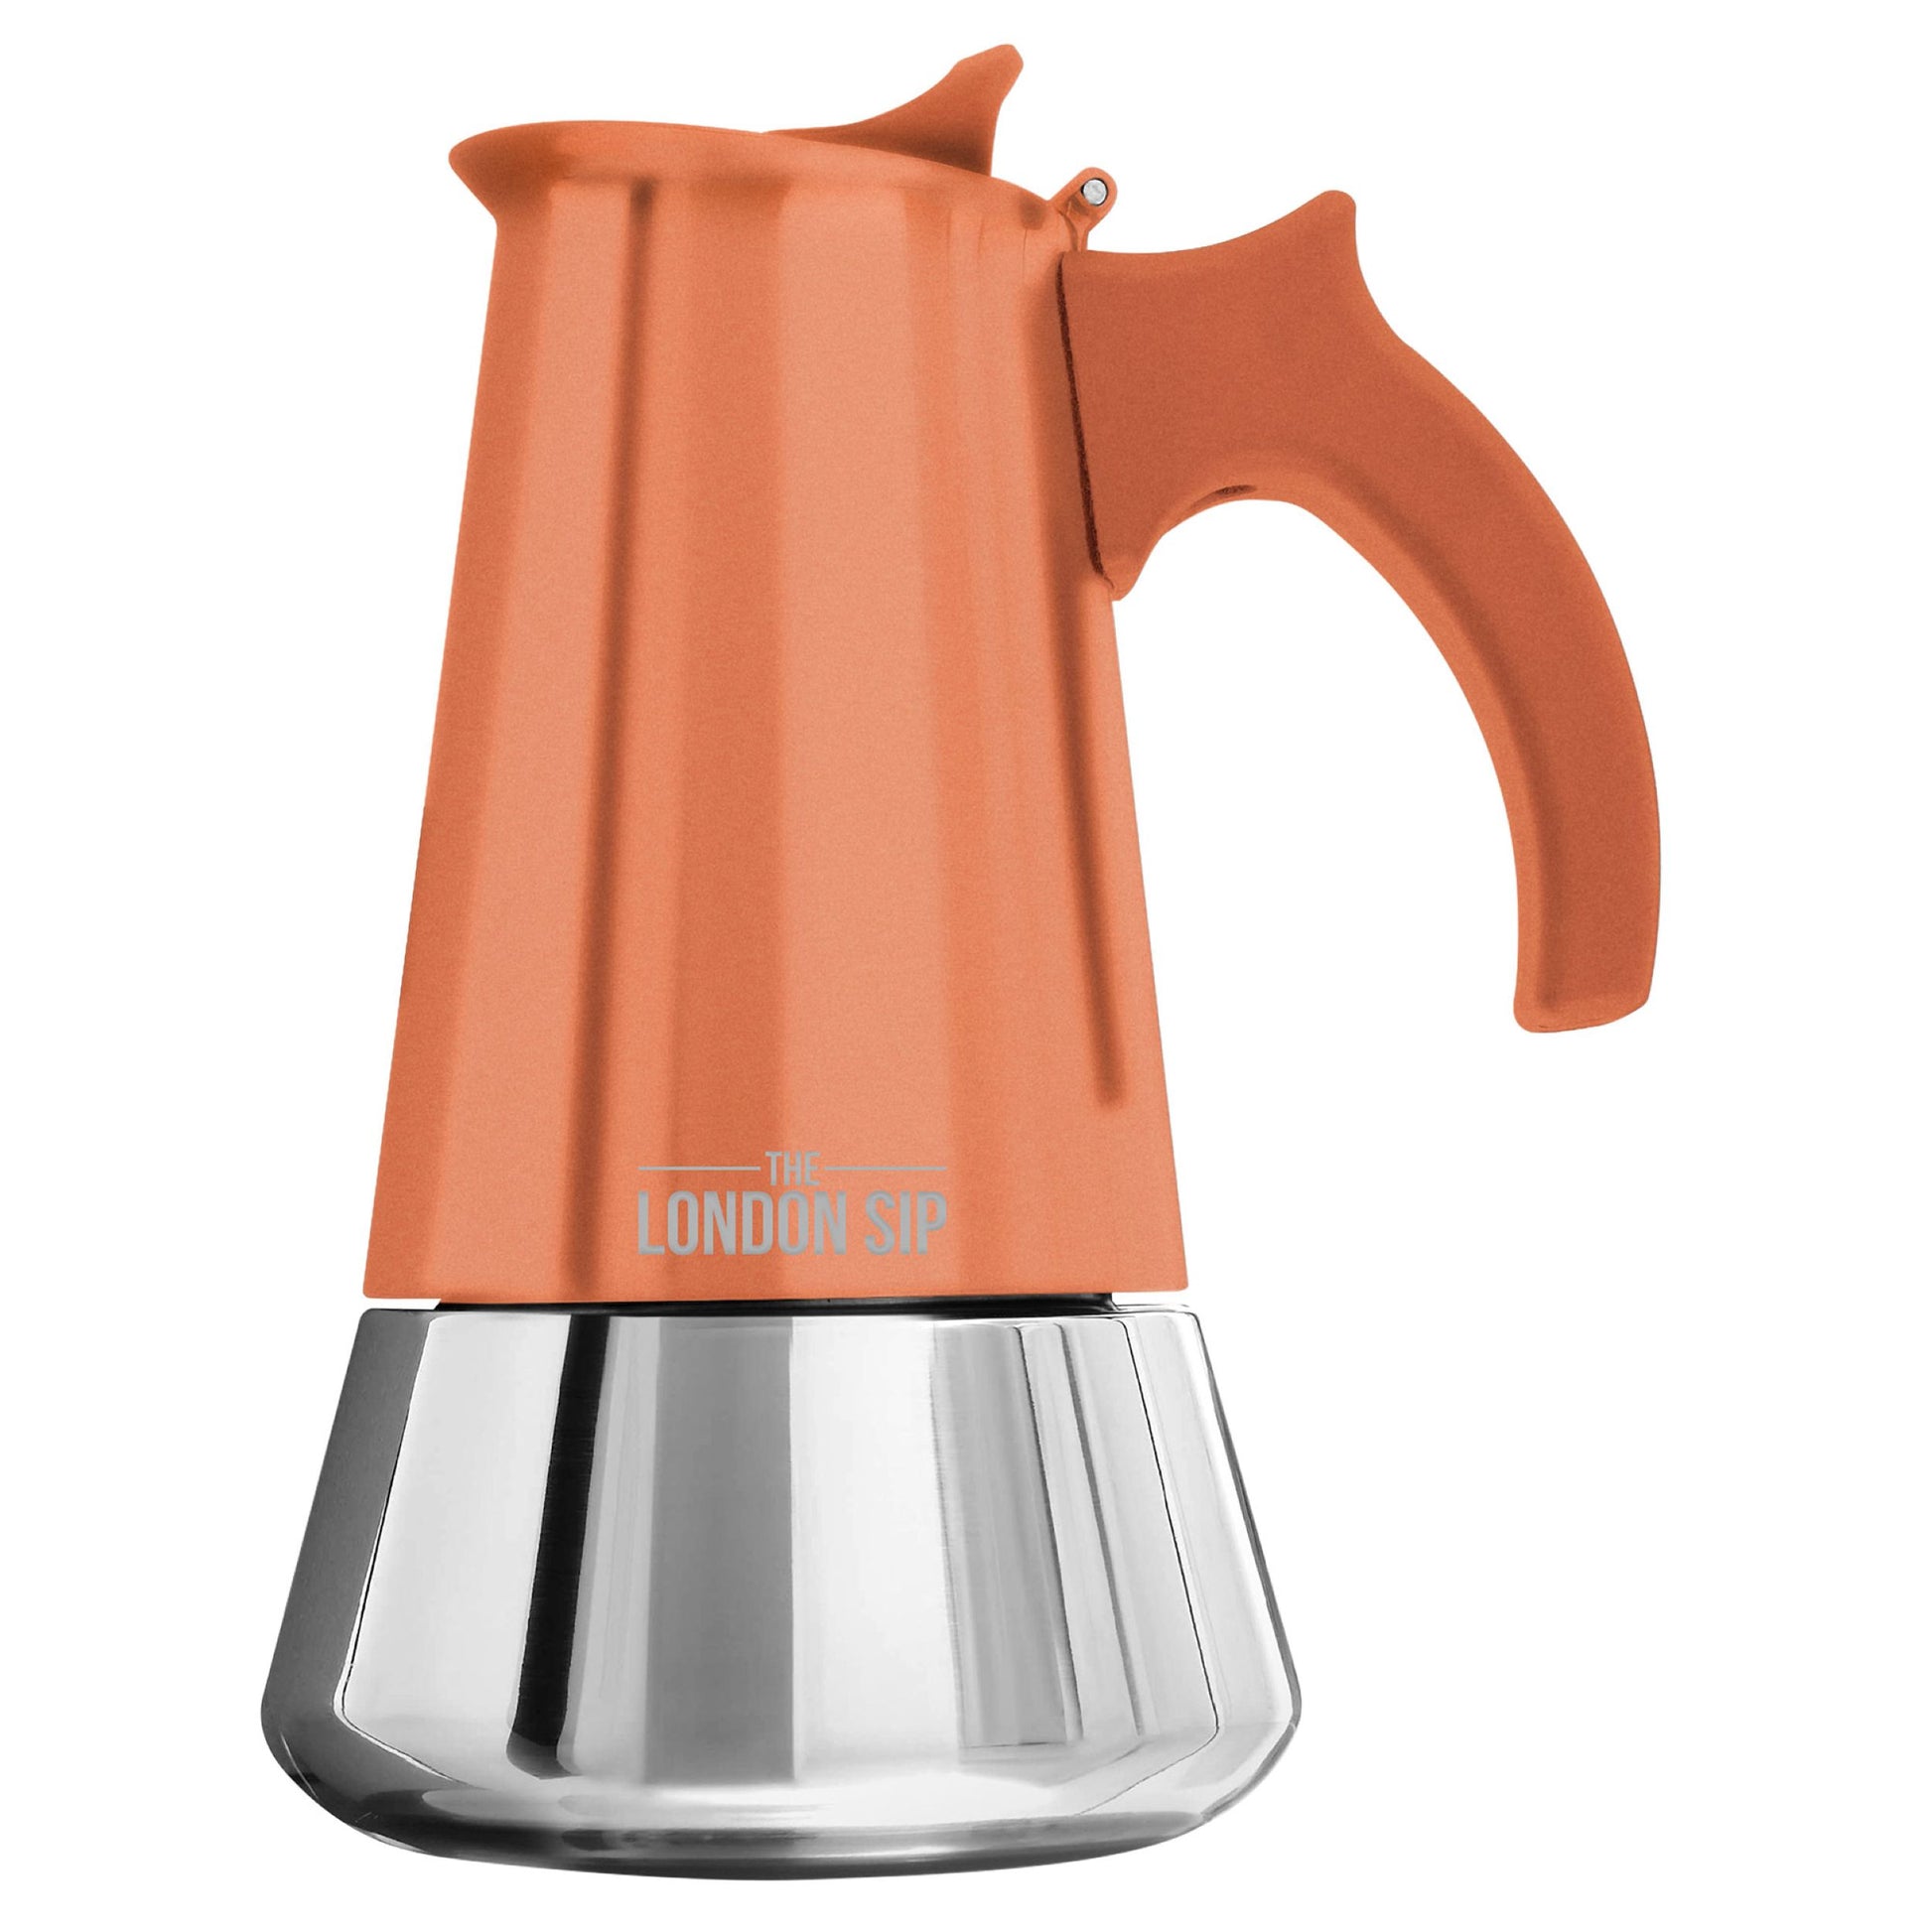 Stainless Steel Stovetop Espresso Coffee Maker – KitchenSupply